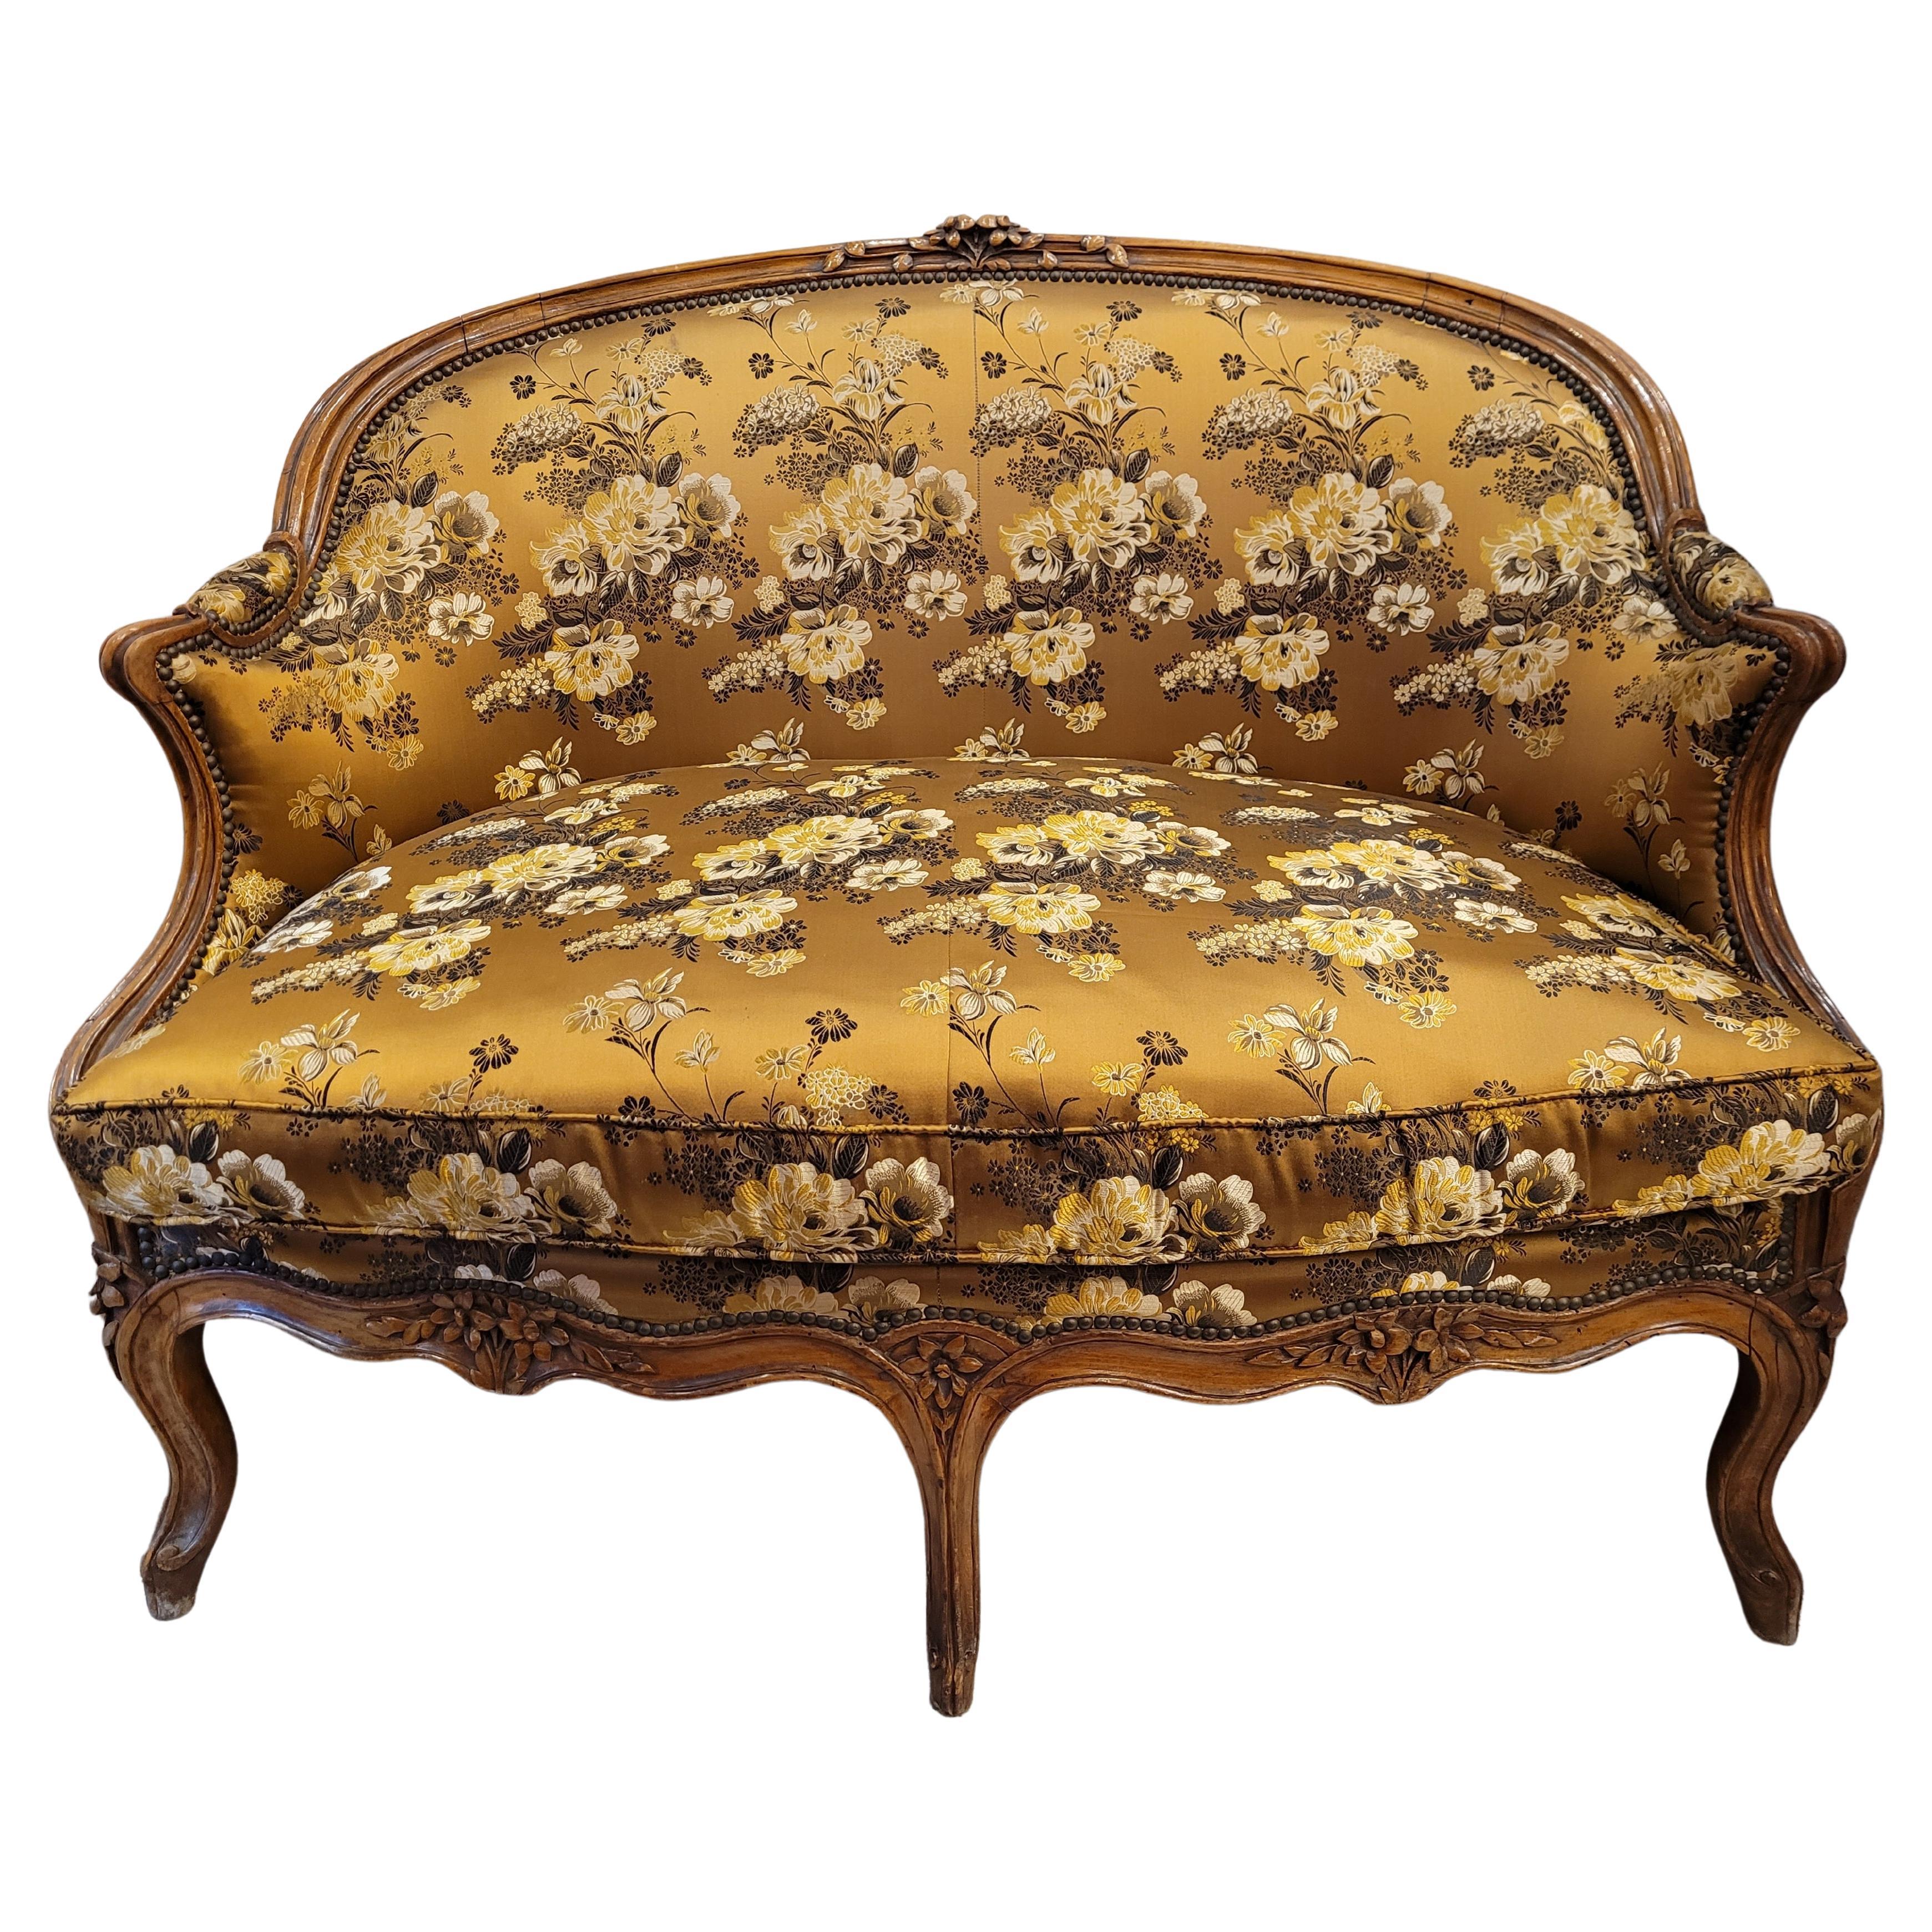 French Sofa -Canape Luis xv Gold Colour, Wood and Floral Silk